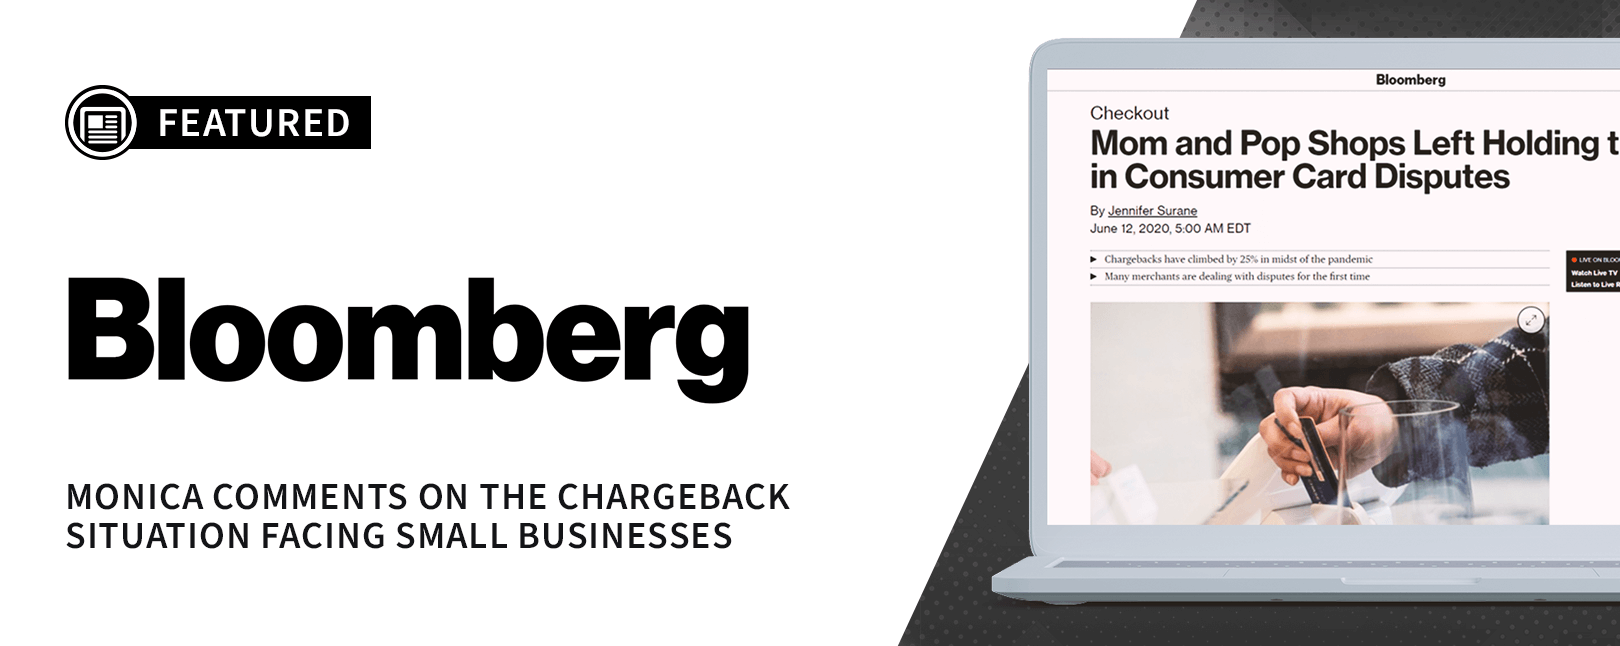 Chargebacks911® COO Featured in Bloomberg News